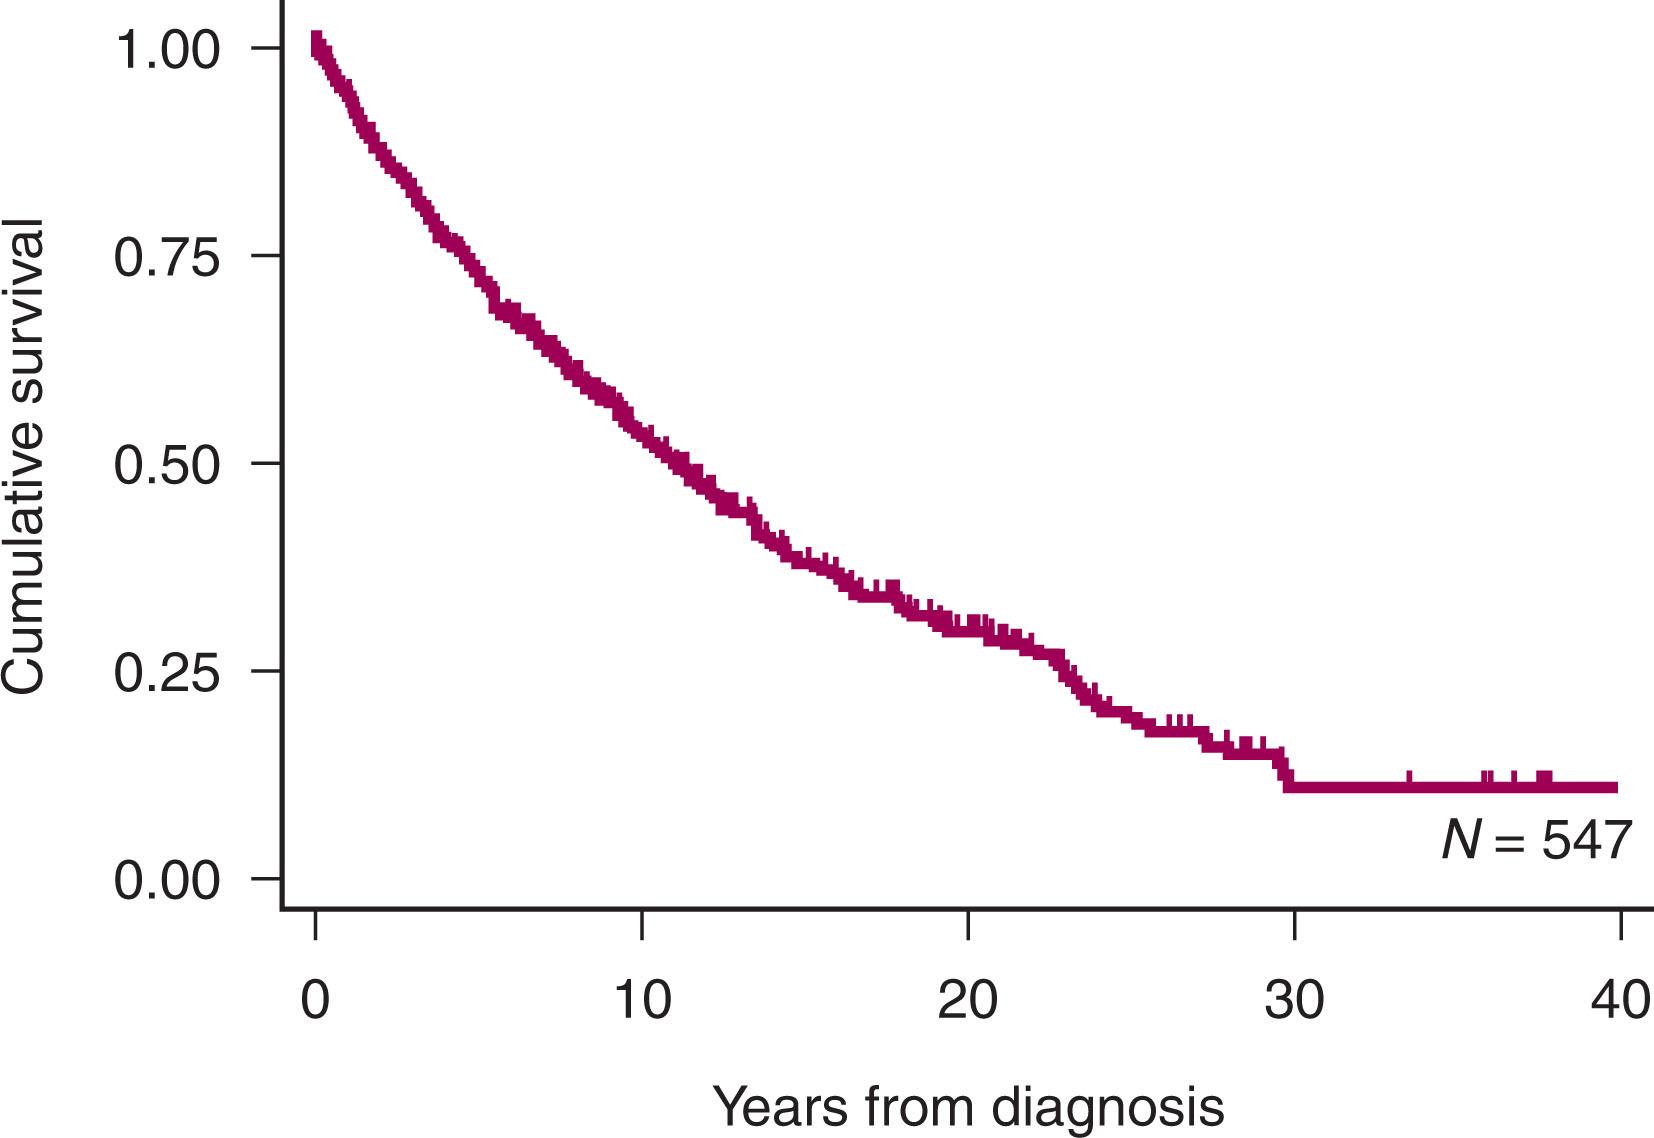 Figure 82.2, OVERALL PROBABILITY OF SURVIVAL OF PATIENTS WITH FOLLICULAR LYMPHOMA TREATED AT ST. BARTHOLOMEW’S HOSPITAL.